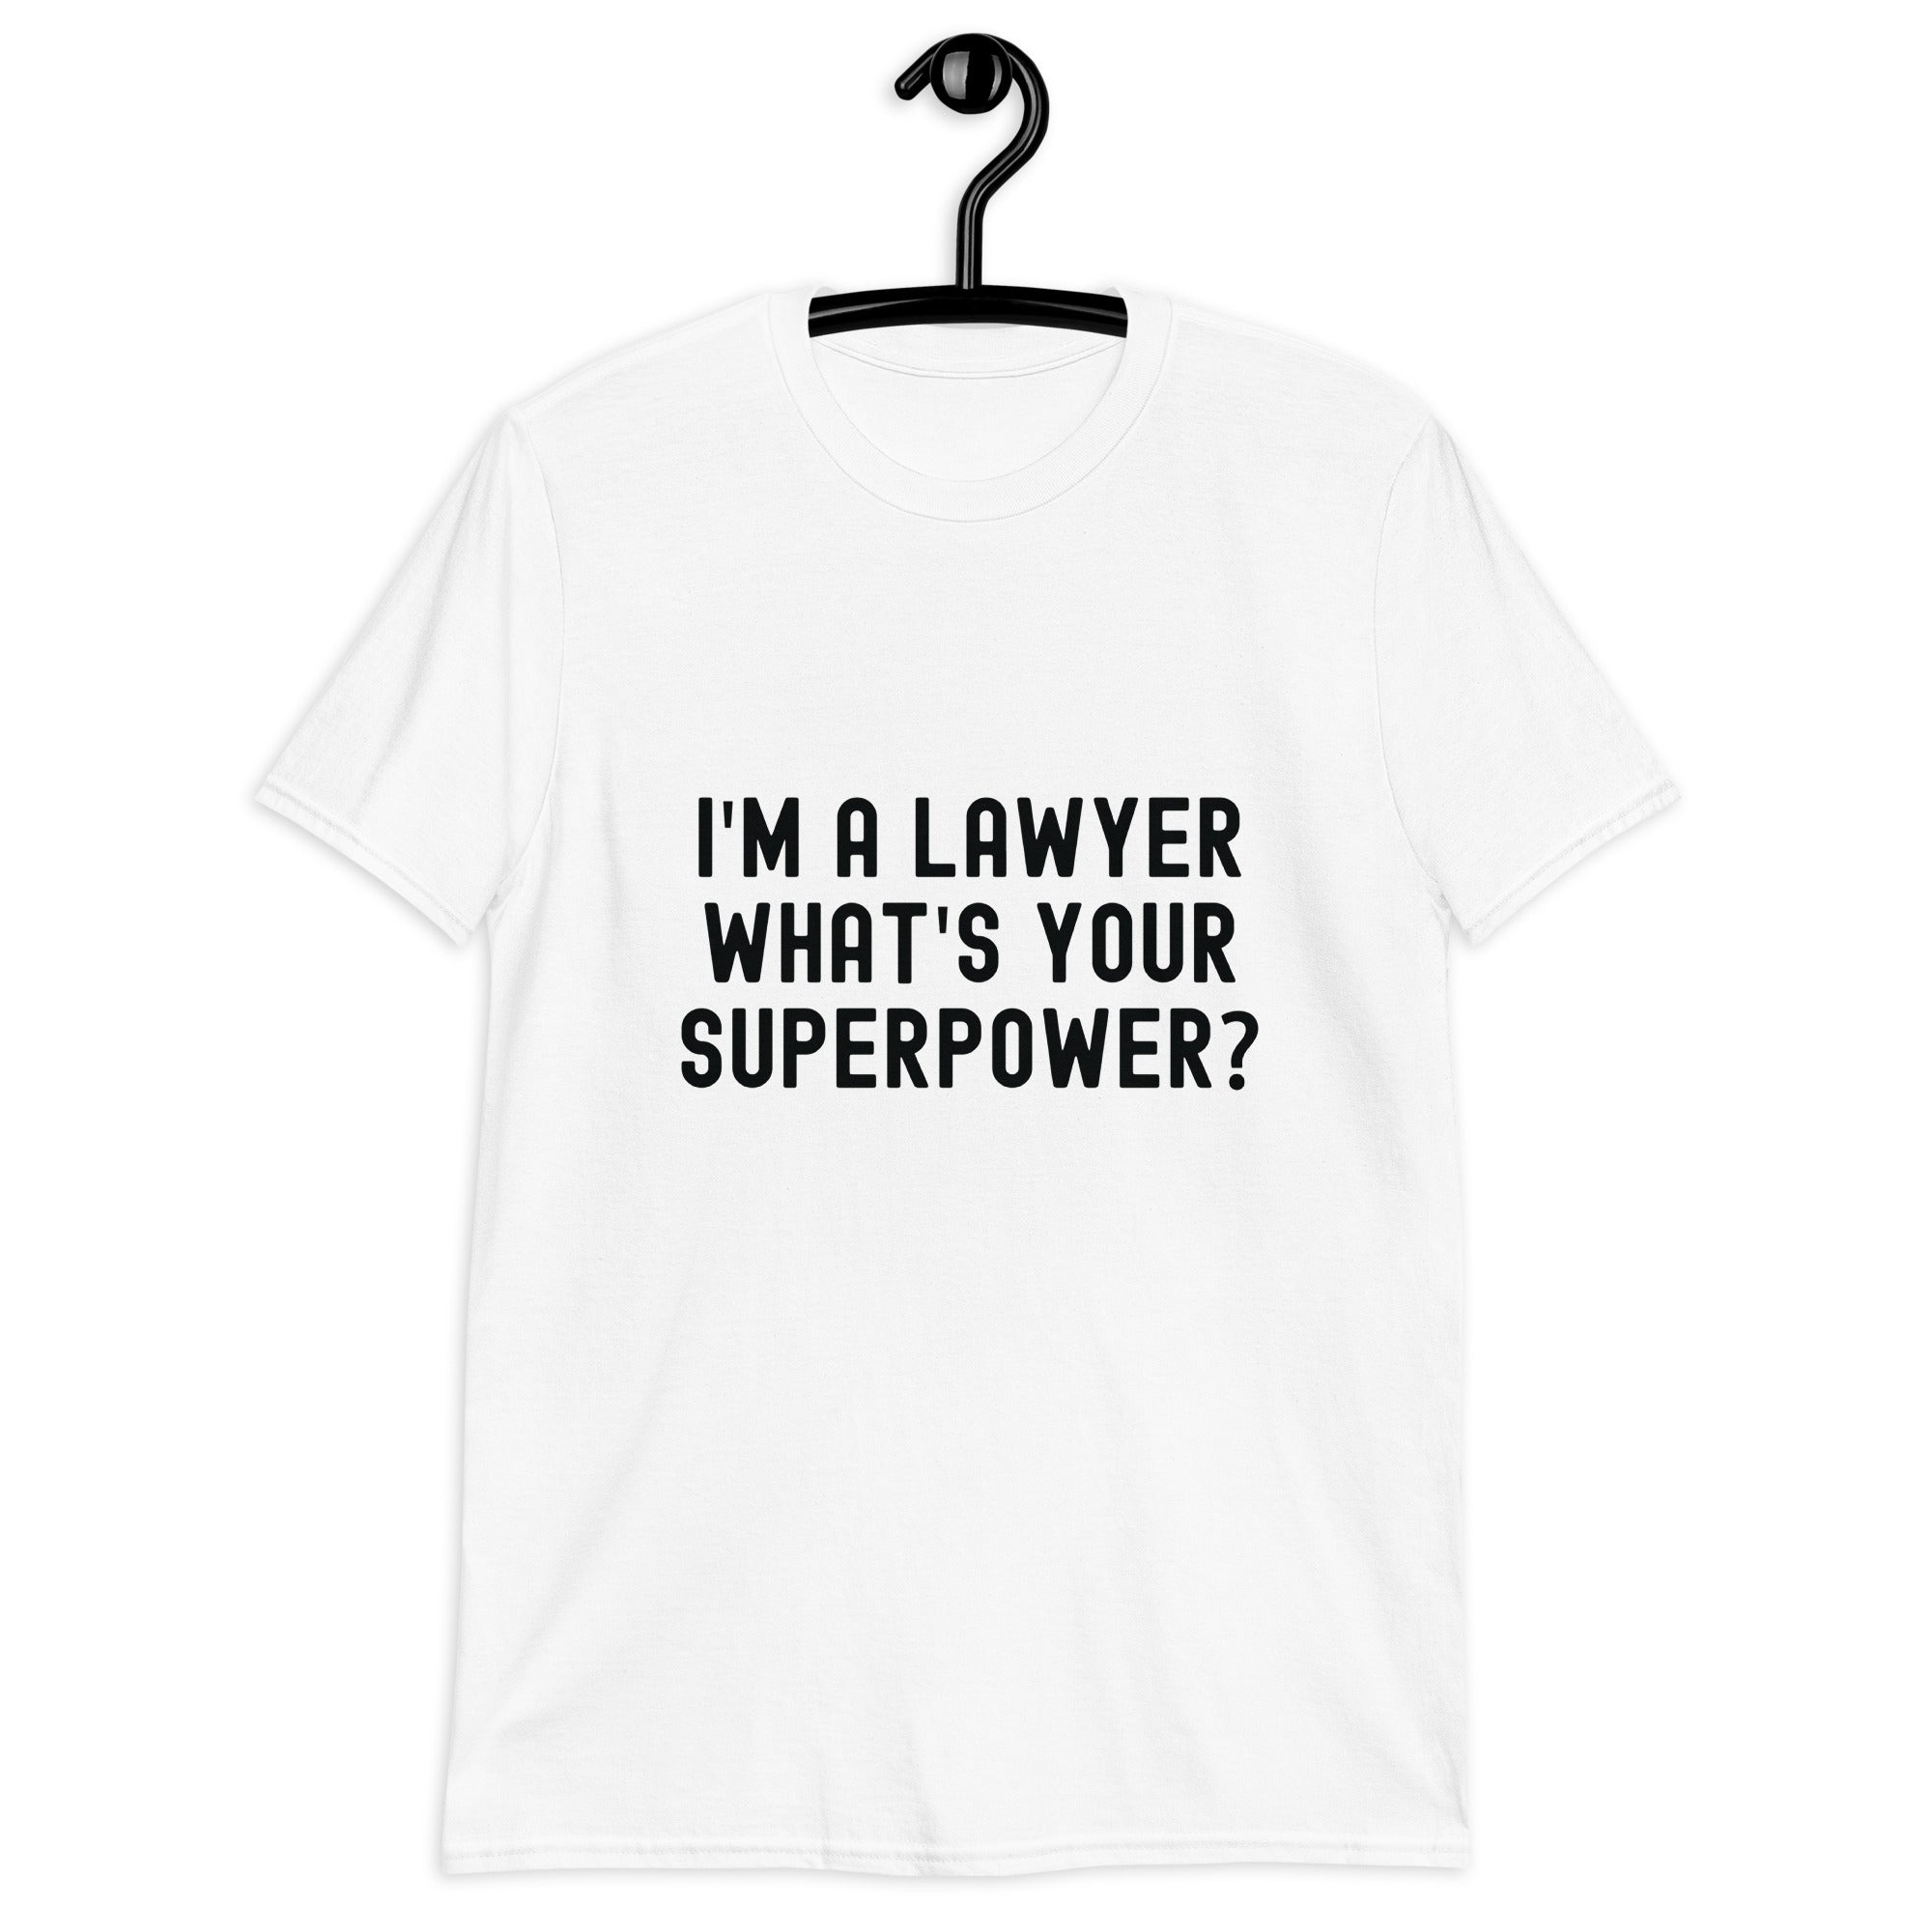 Short-Sleeve Unisex T-Shirt | I'm a lawyer, what's your superpower?